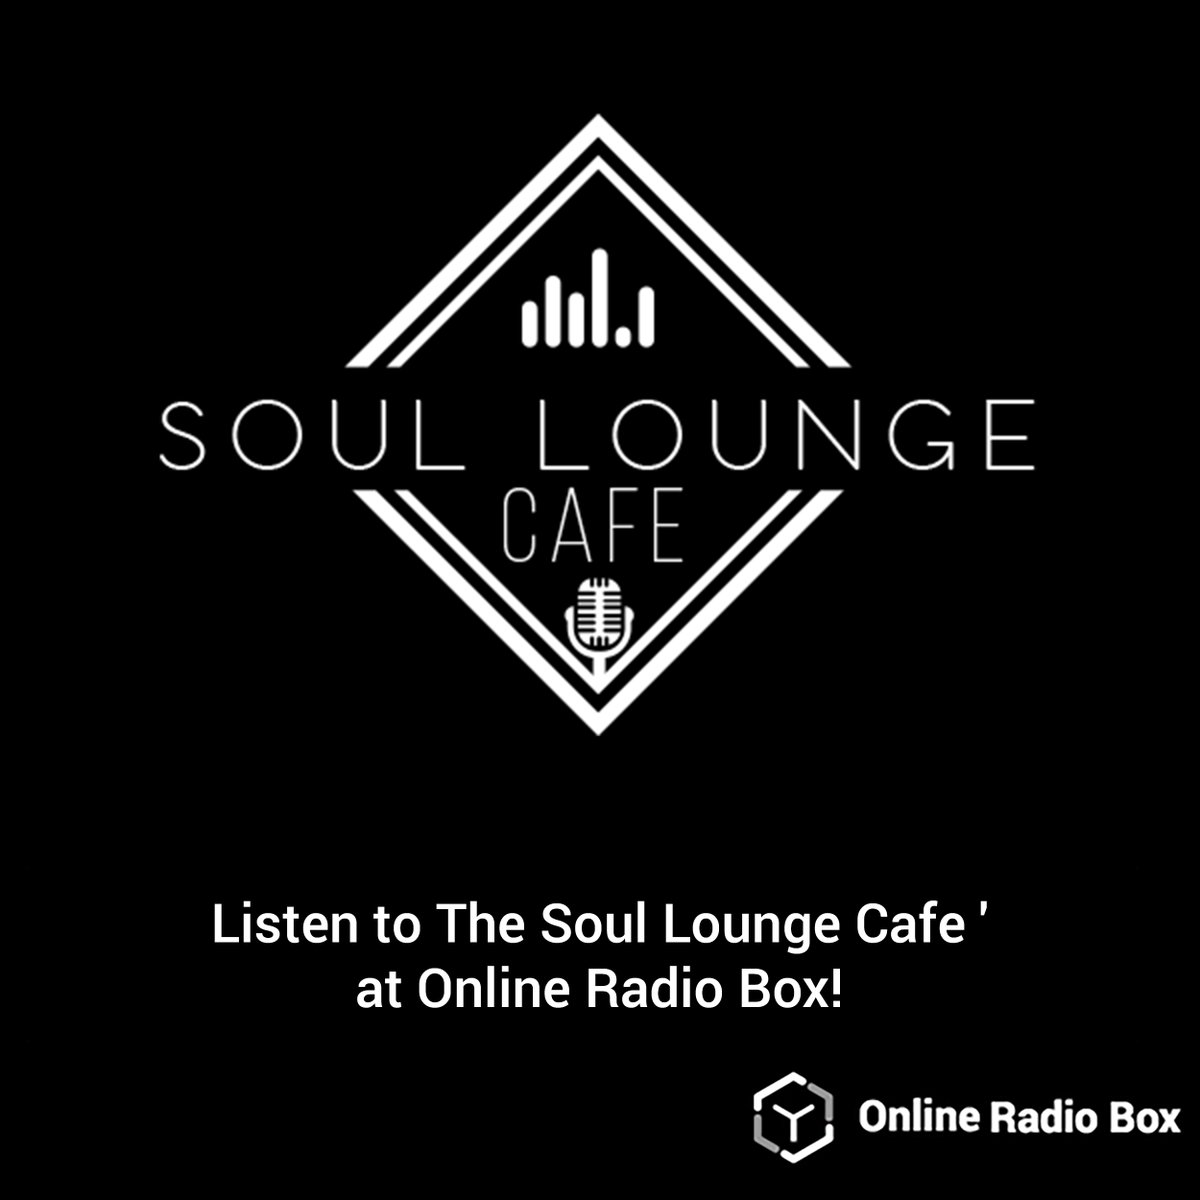 Listen to The Soul Lounge Cafe 'USA! 🤩👍🇺🇸
@soulloungecafe  was created as a musical outlet for lovers of good music. This station is for the sophisticated listener with distinguishing taste! 👏✨📻
Find The Soul Lounge Cafe' at #onlineradiobox! 🎧
onlineradiobox.com/us/thesoulloun…